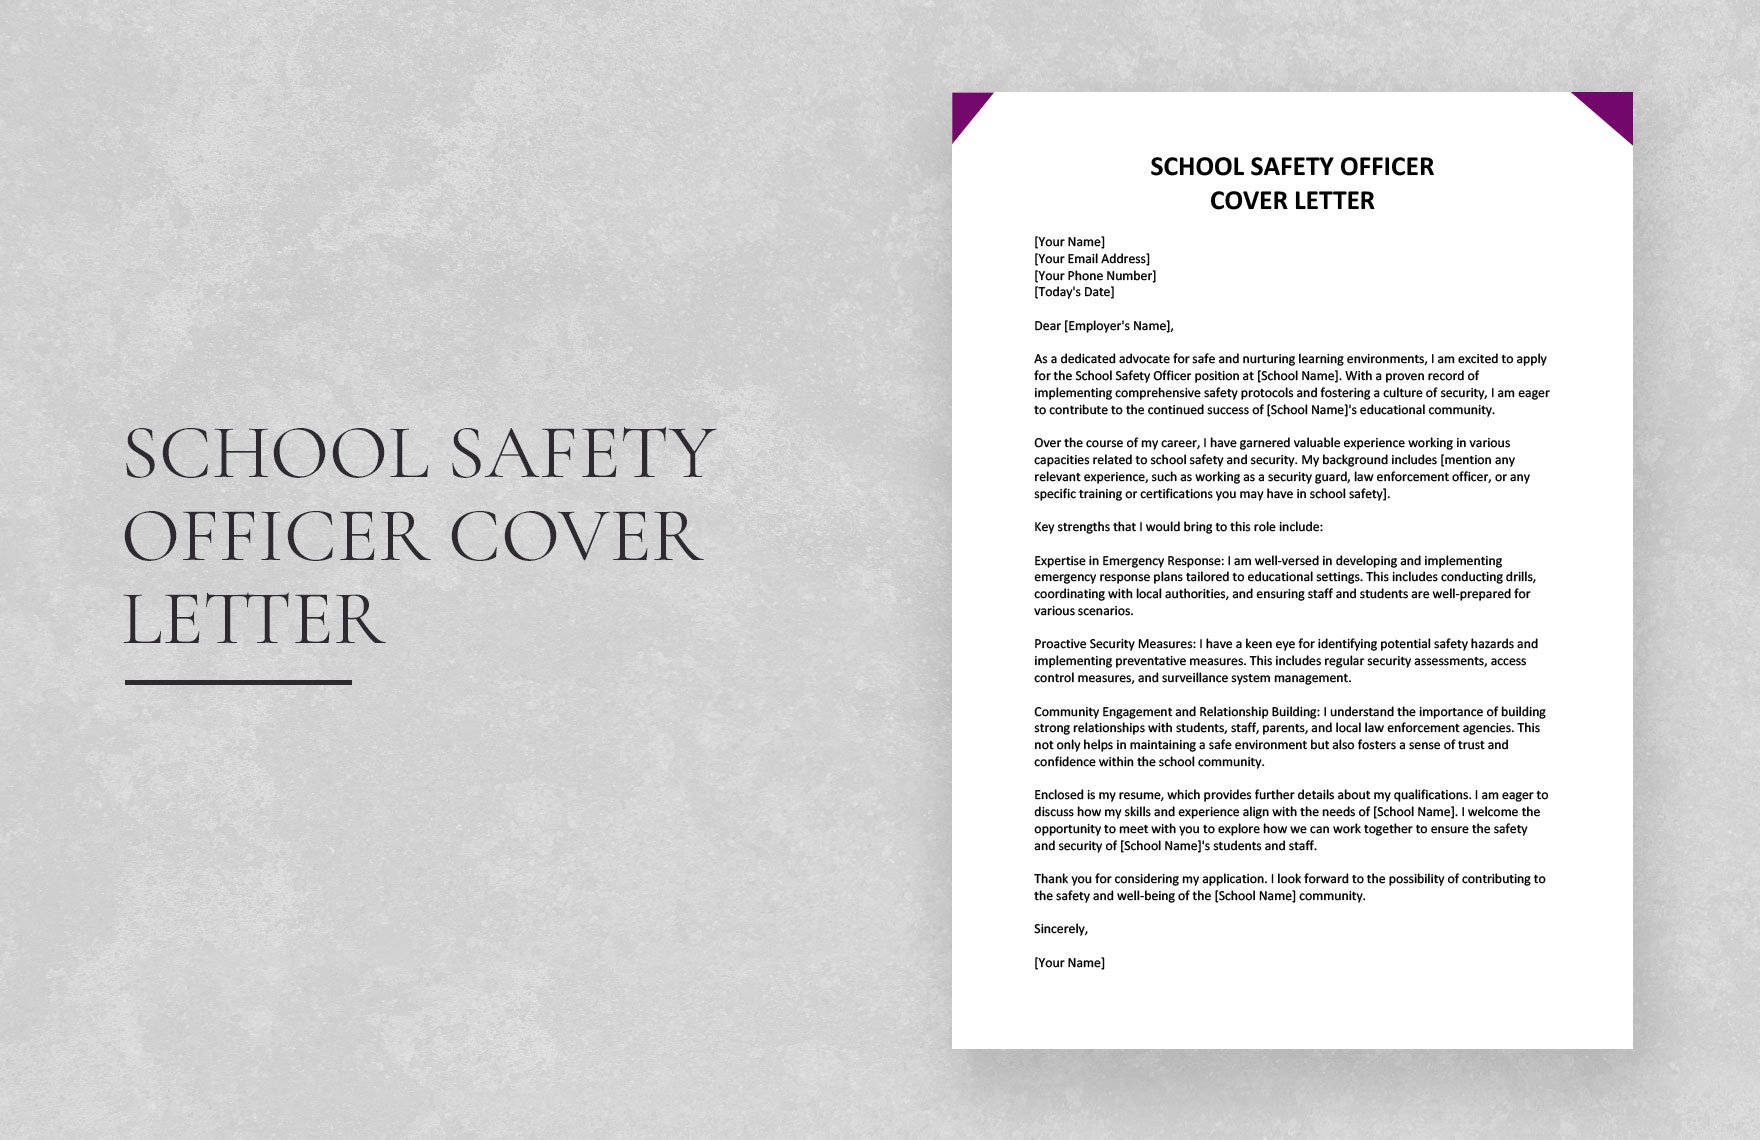 School Safety Officer Cover Letter in Word, Google Docs